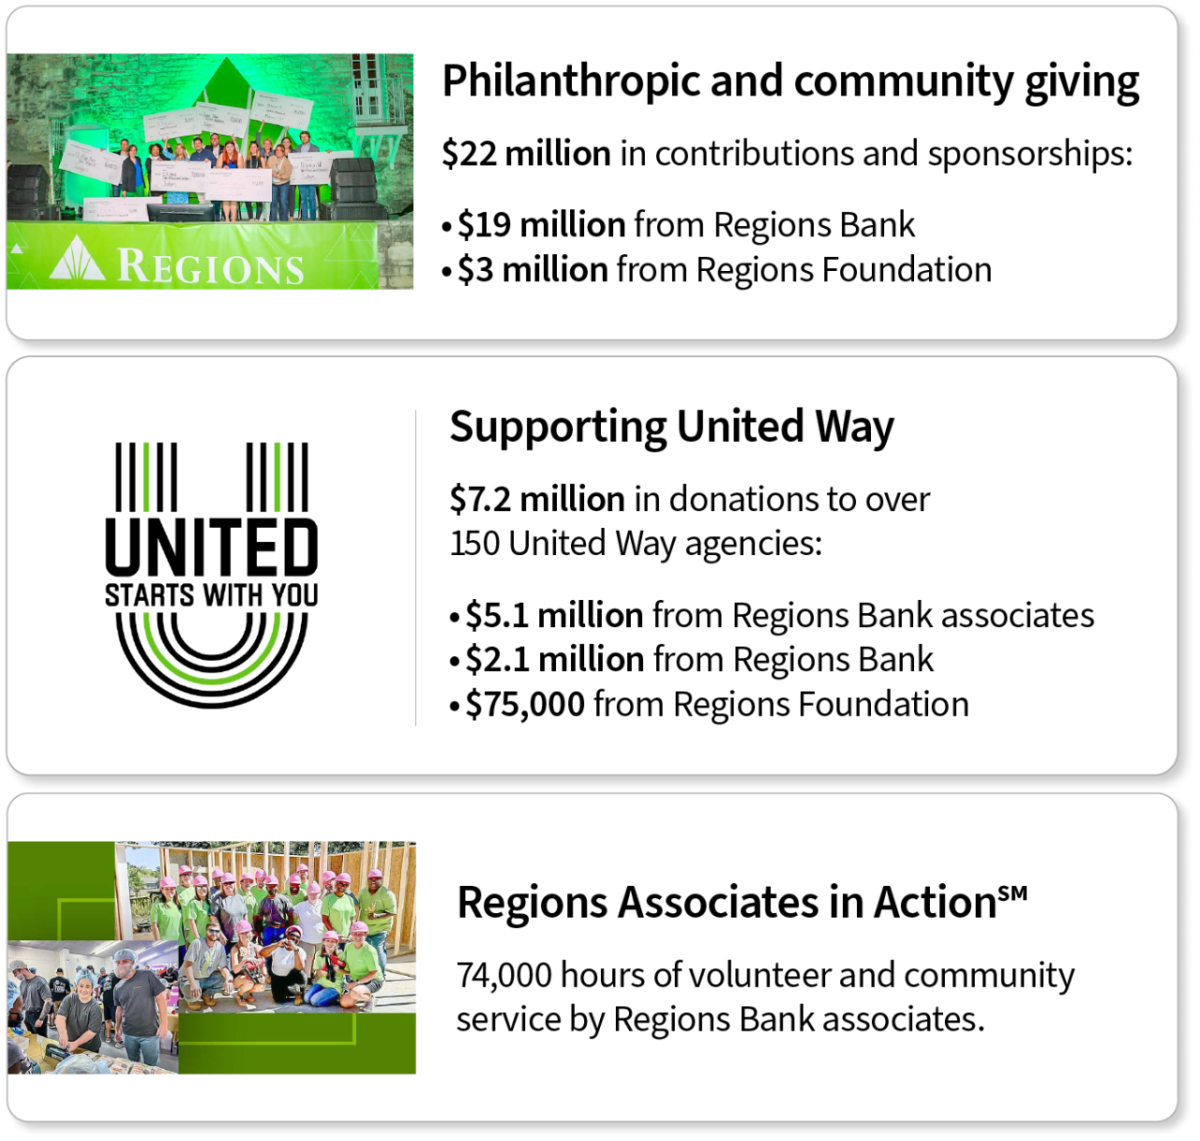 Three statistics boxes with corresponding logos for Philanthropic and community giving, supporting United Way, and Regions Associates in Action